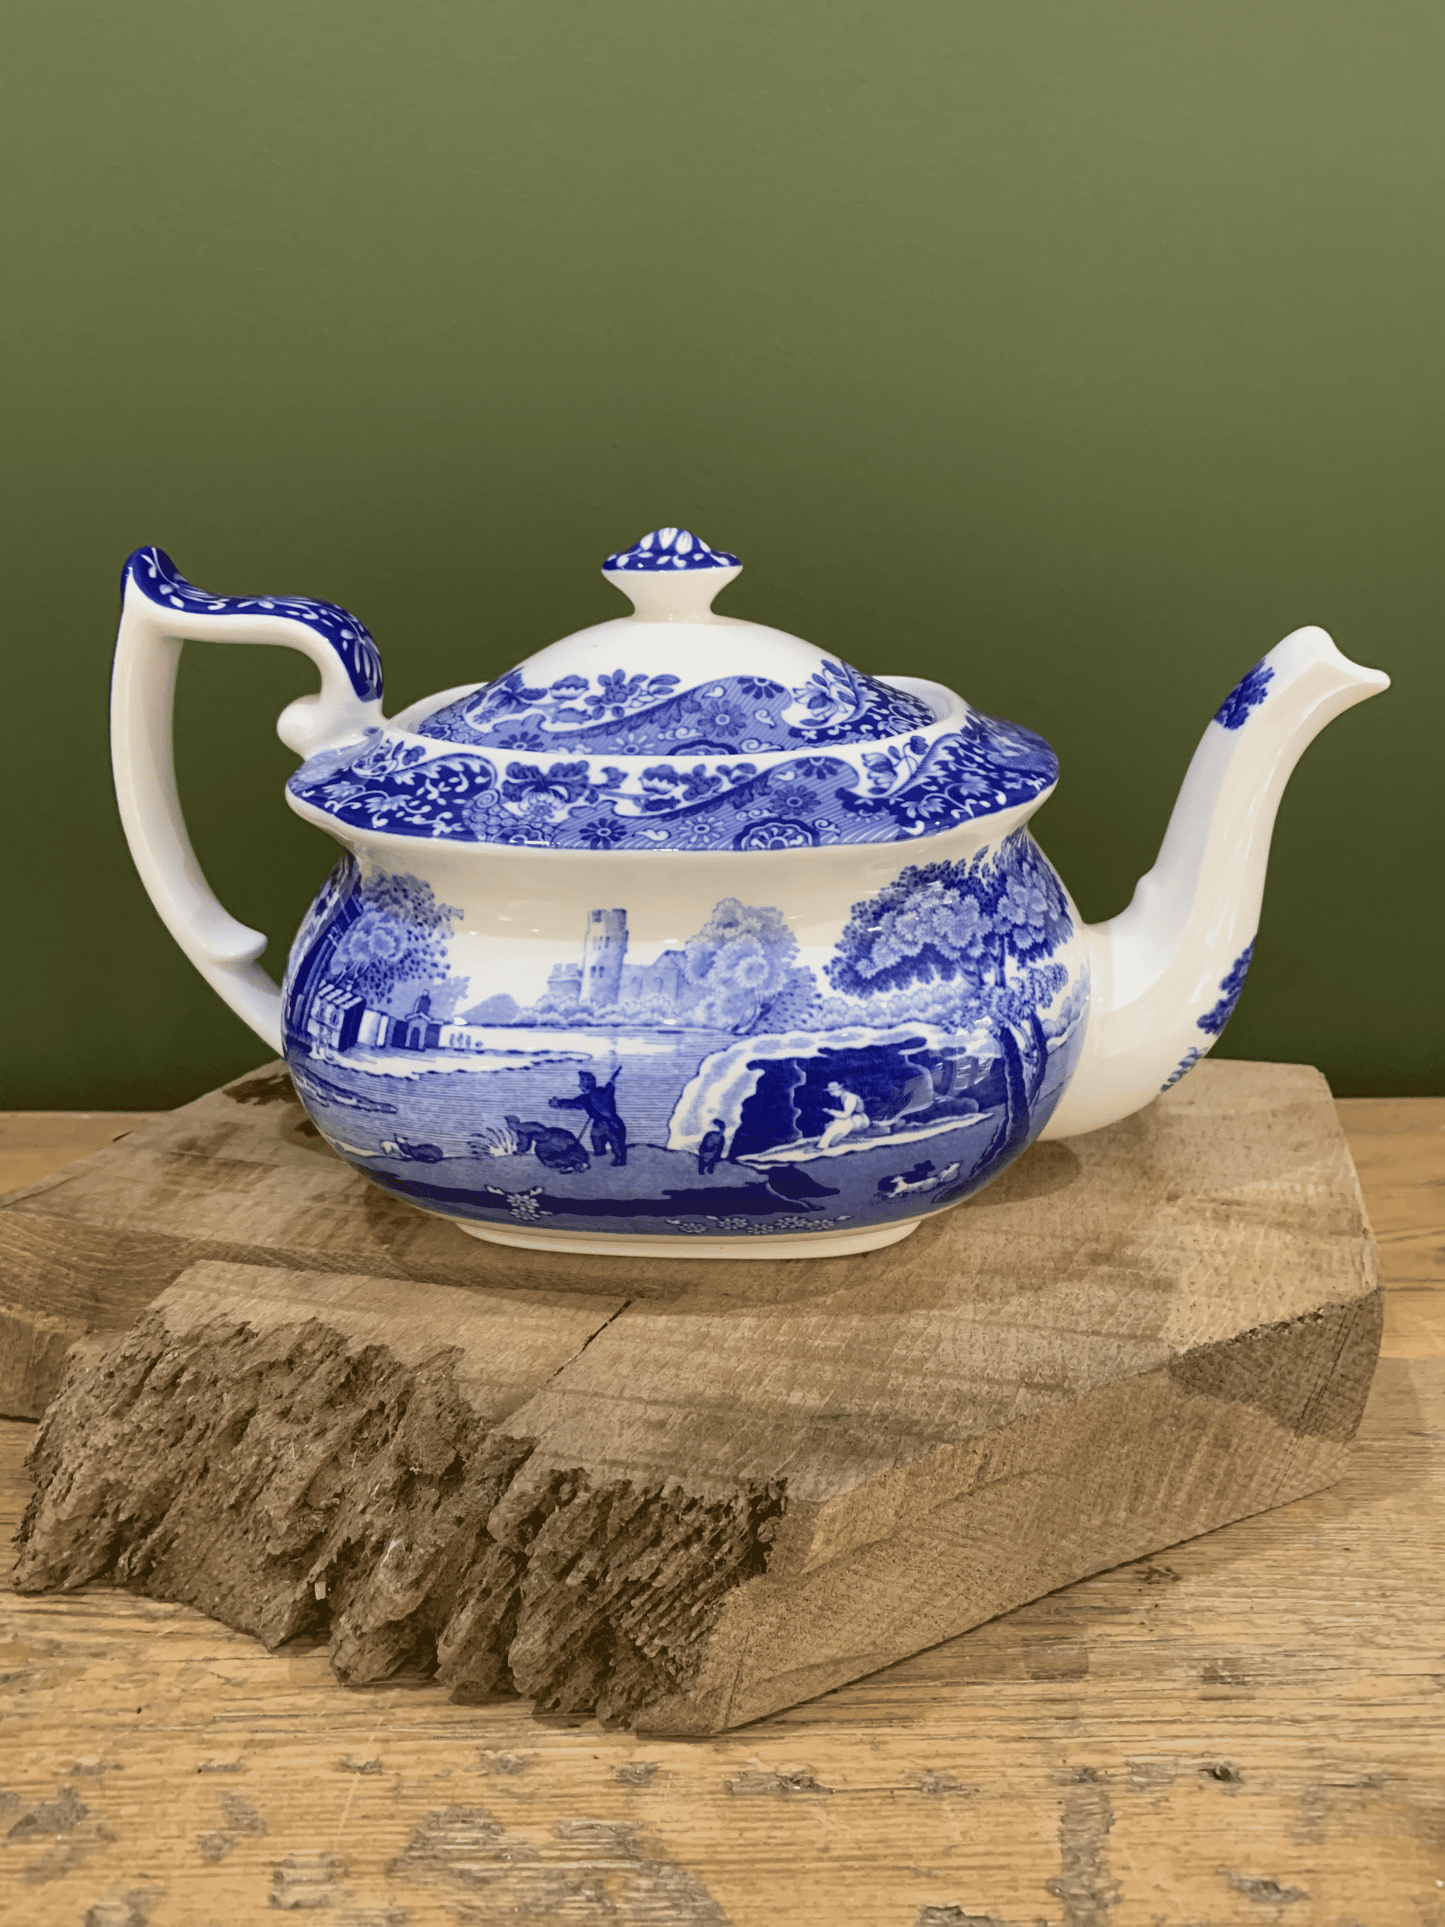 Large Spode Teapot - Exquisite Elegance for Tea Enthusiasts